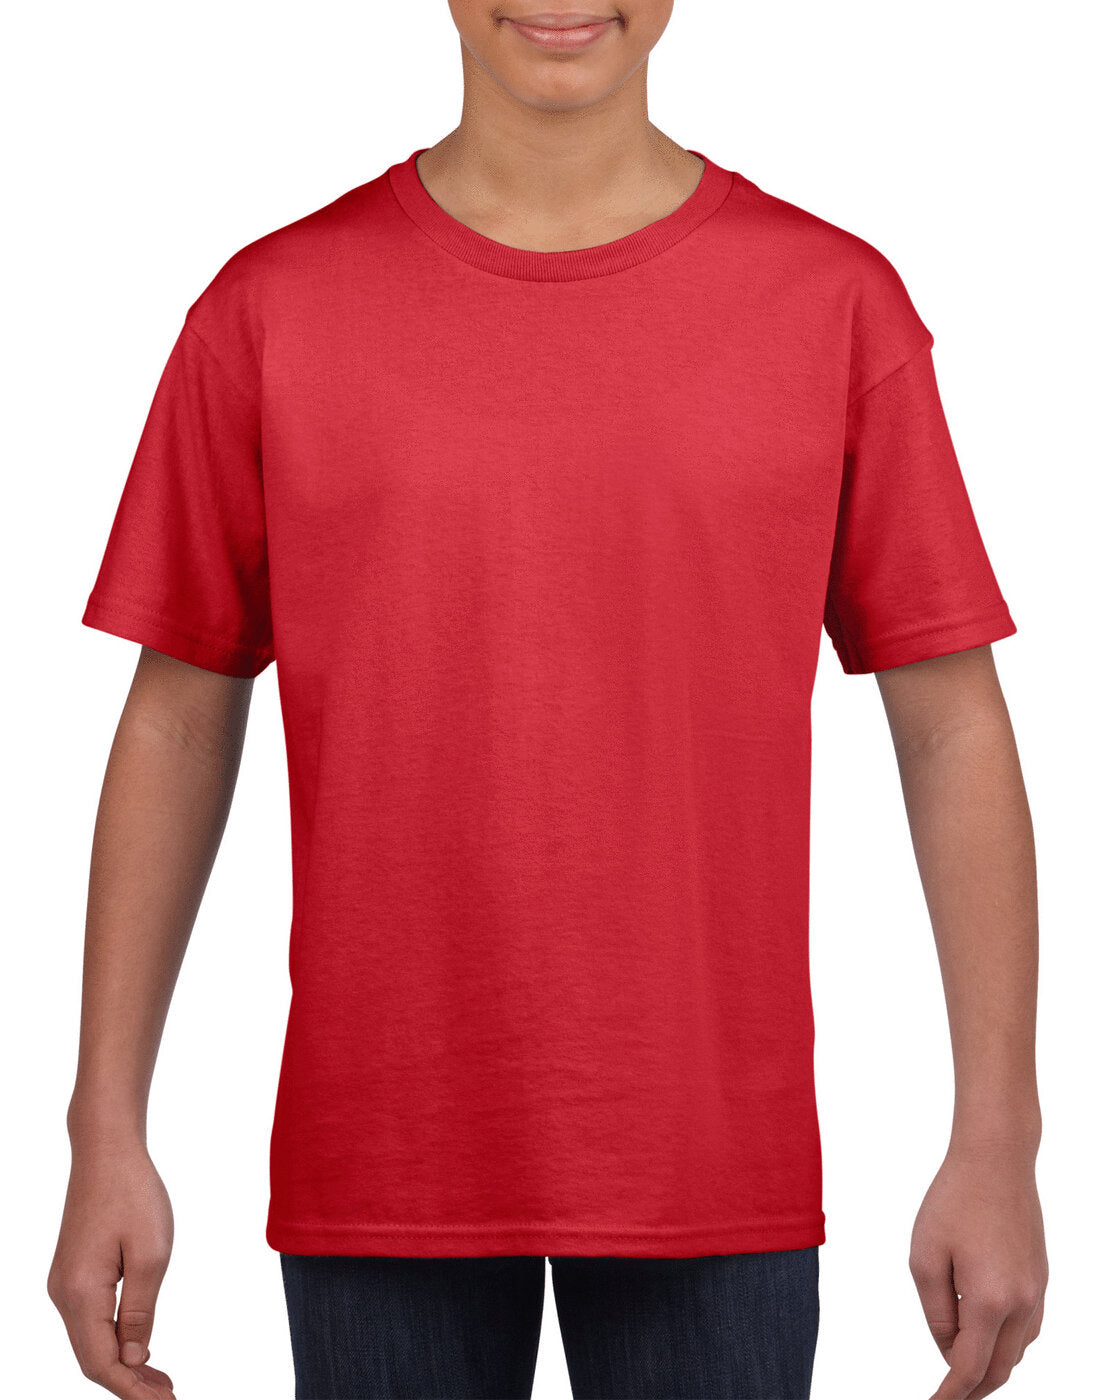 Gildan Kids Softstyle Youth T-Shirt - Red